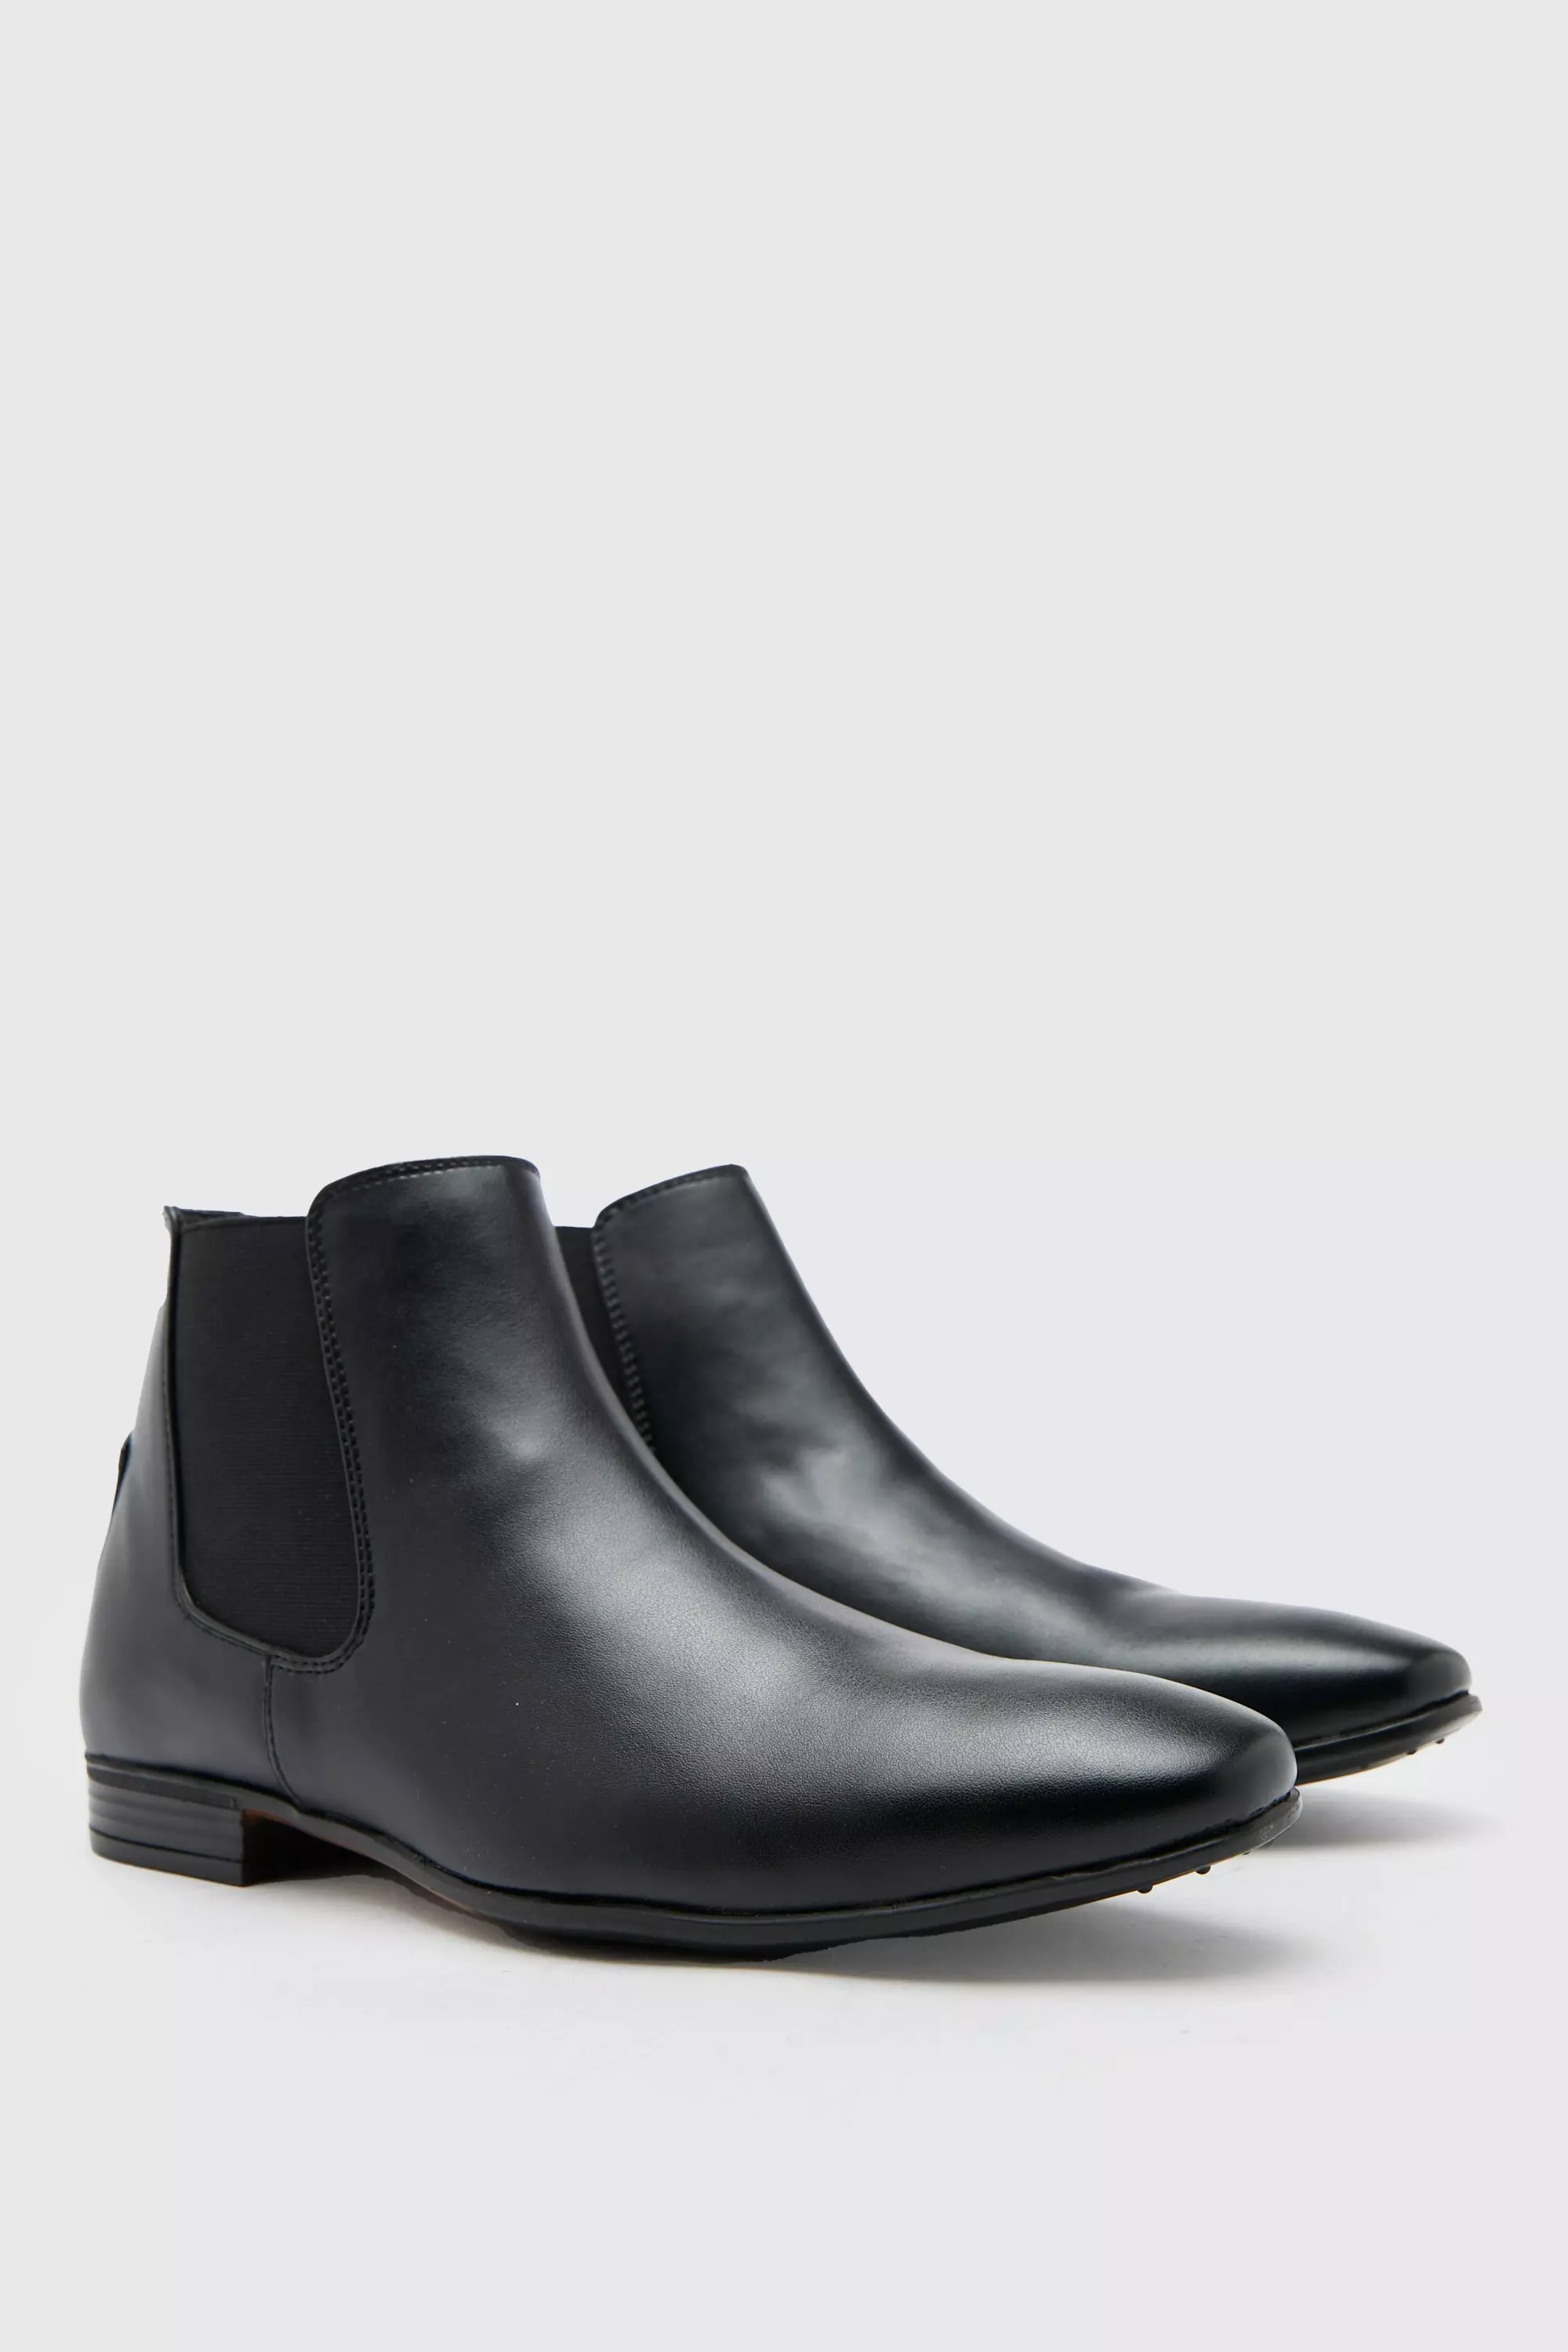 Marine Tag det op At blokere Faux Leather Chelsea Boot | boohooMAN USA